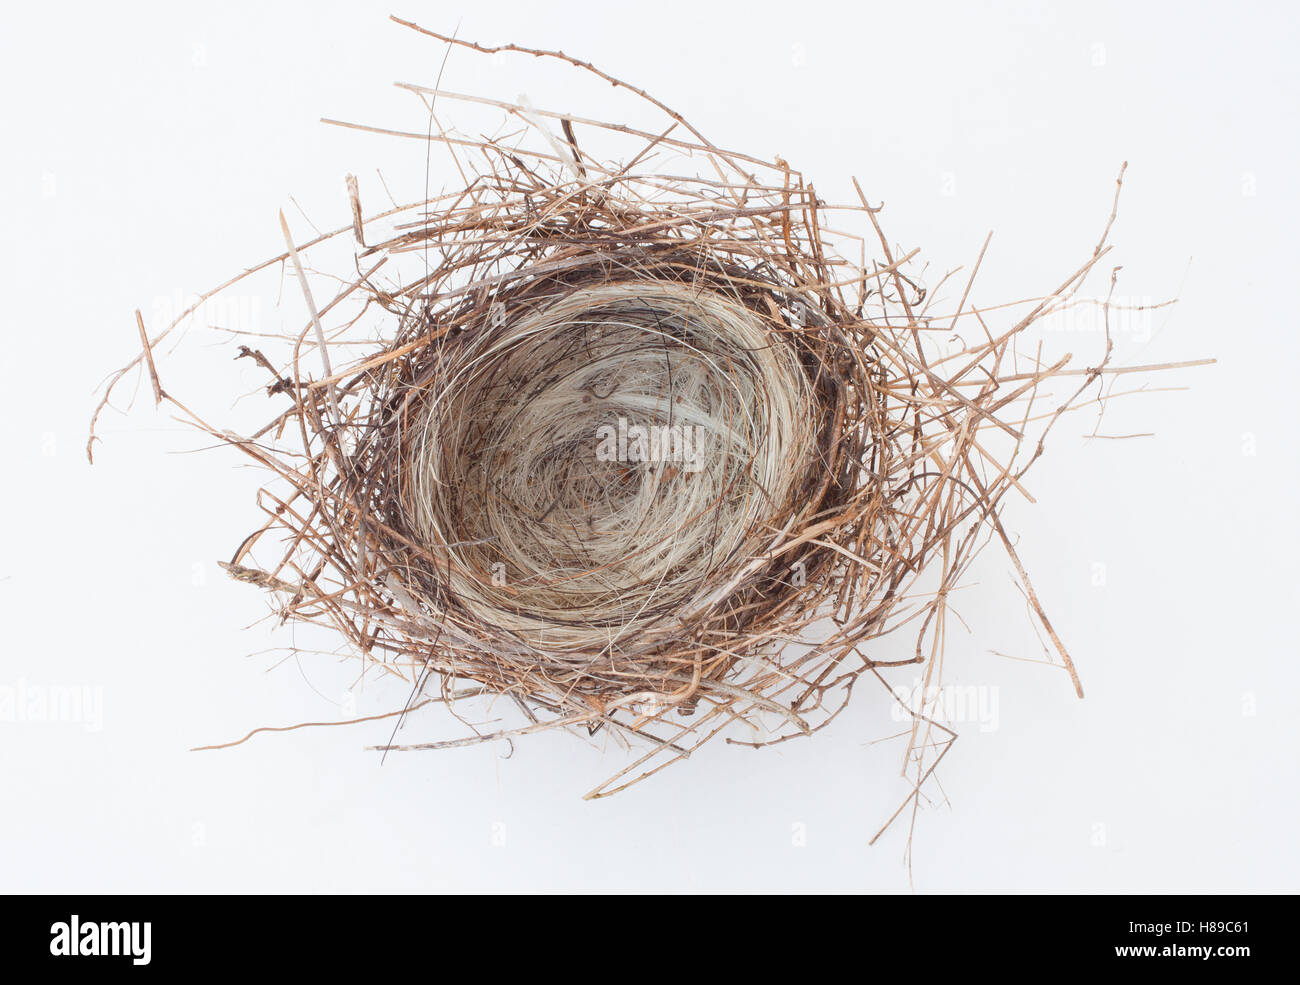 Very small bird nest with pine needles and horse hair Stock Photo